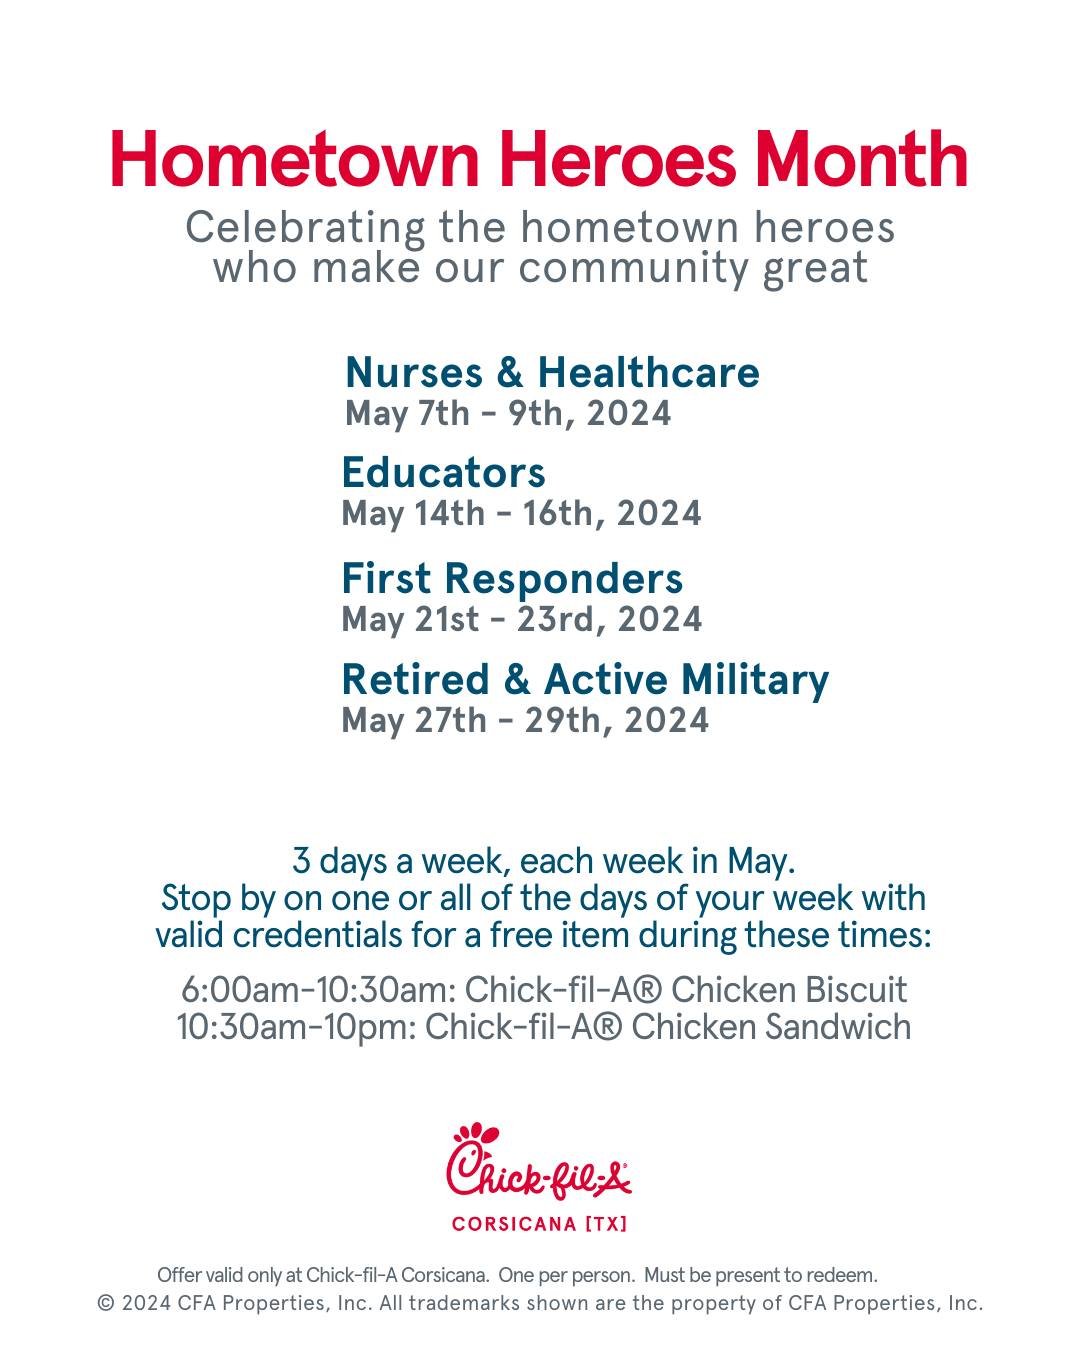 Join us for Hometown Heroes Month!😁

Celebrating the remarkable individuals who uplift our community every day. Swing by three days a week throughout May with your valid credentials and enjoy a complimentary treat on us. 

Thank you for making our h